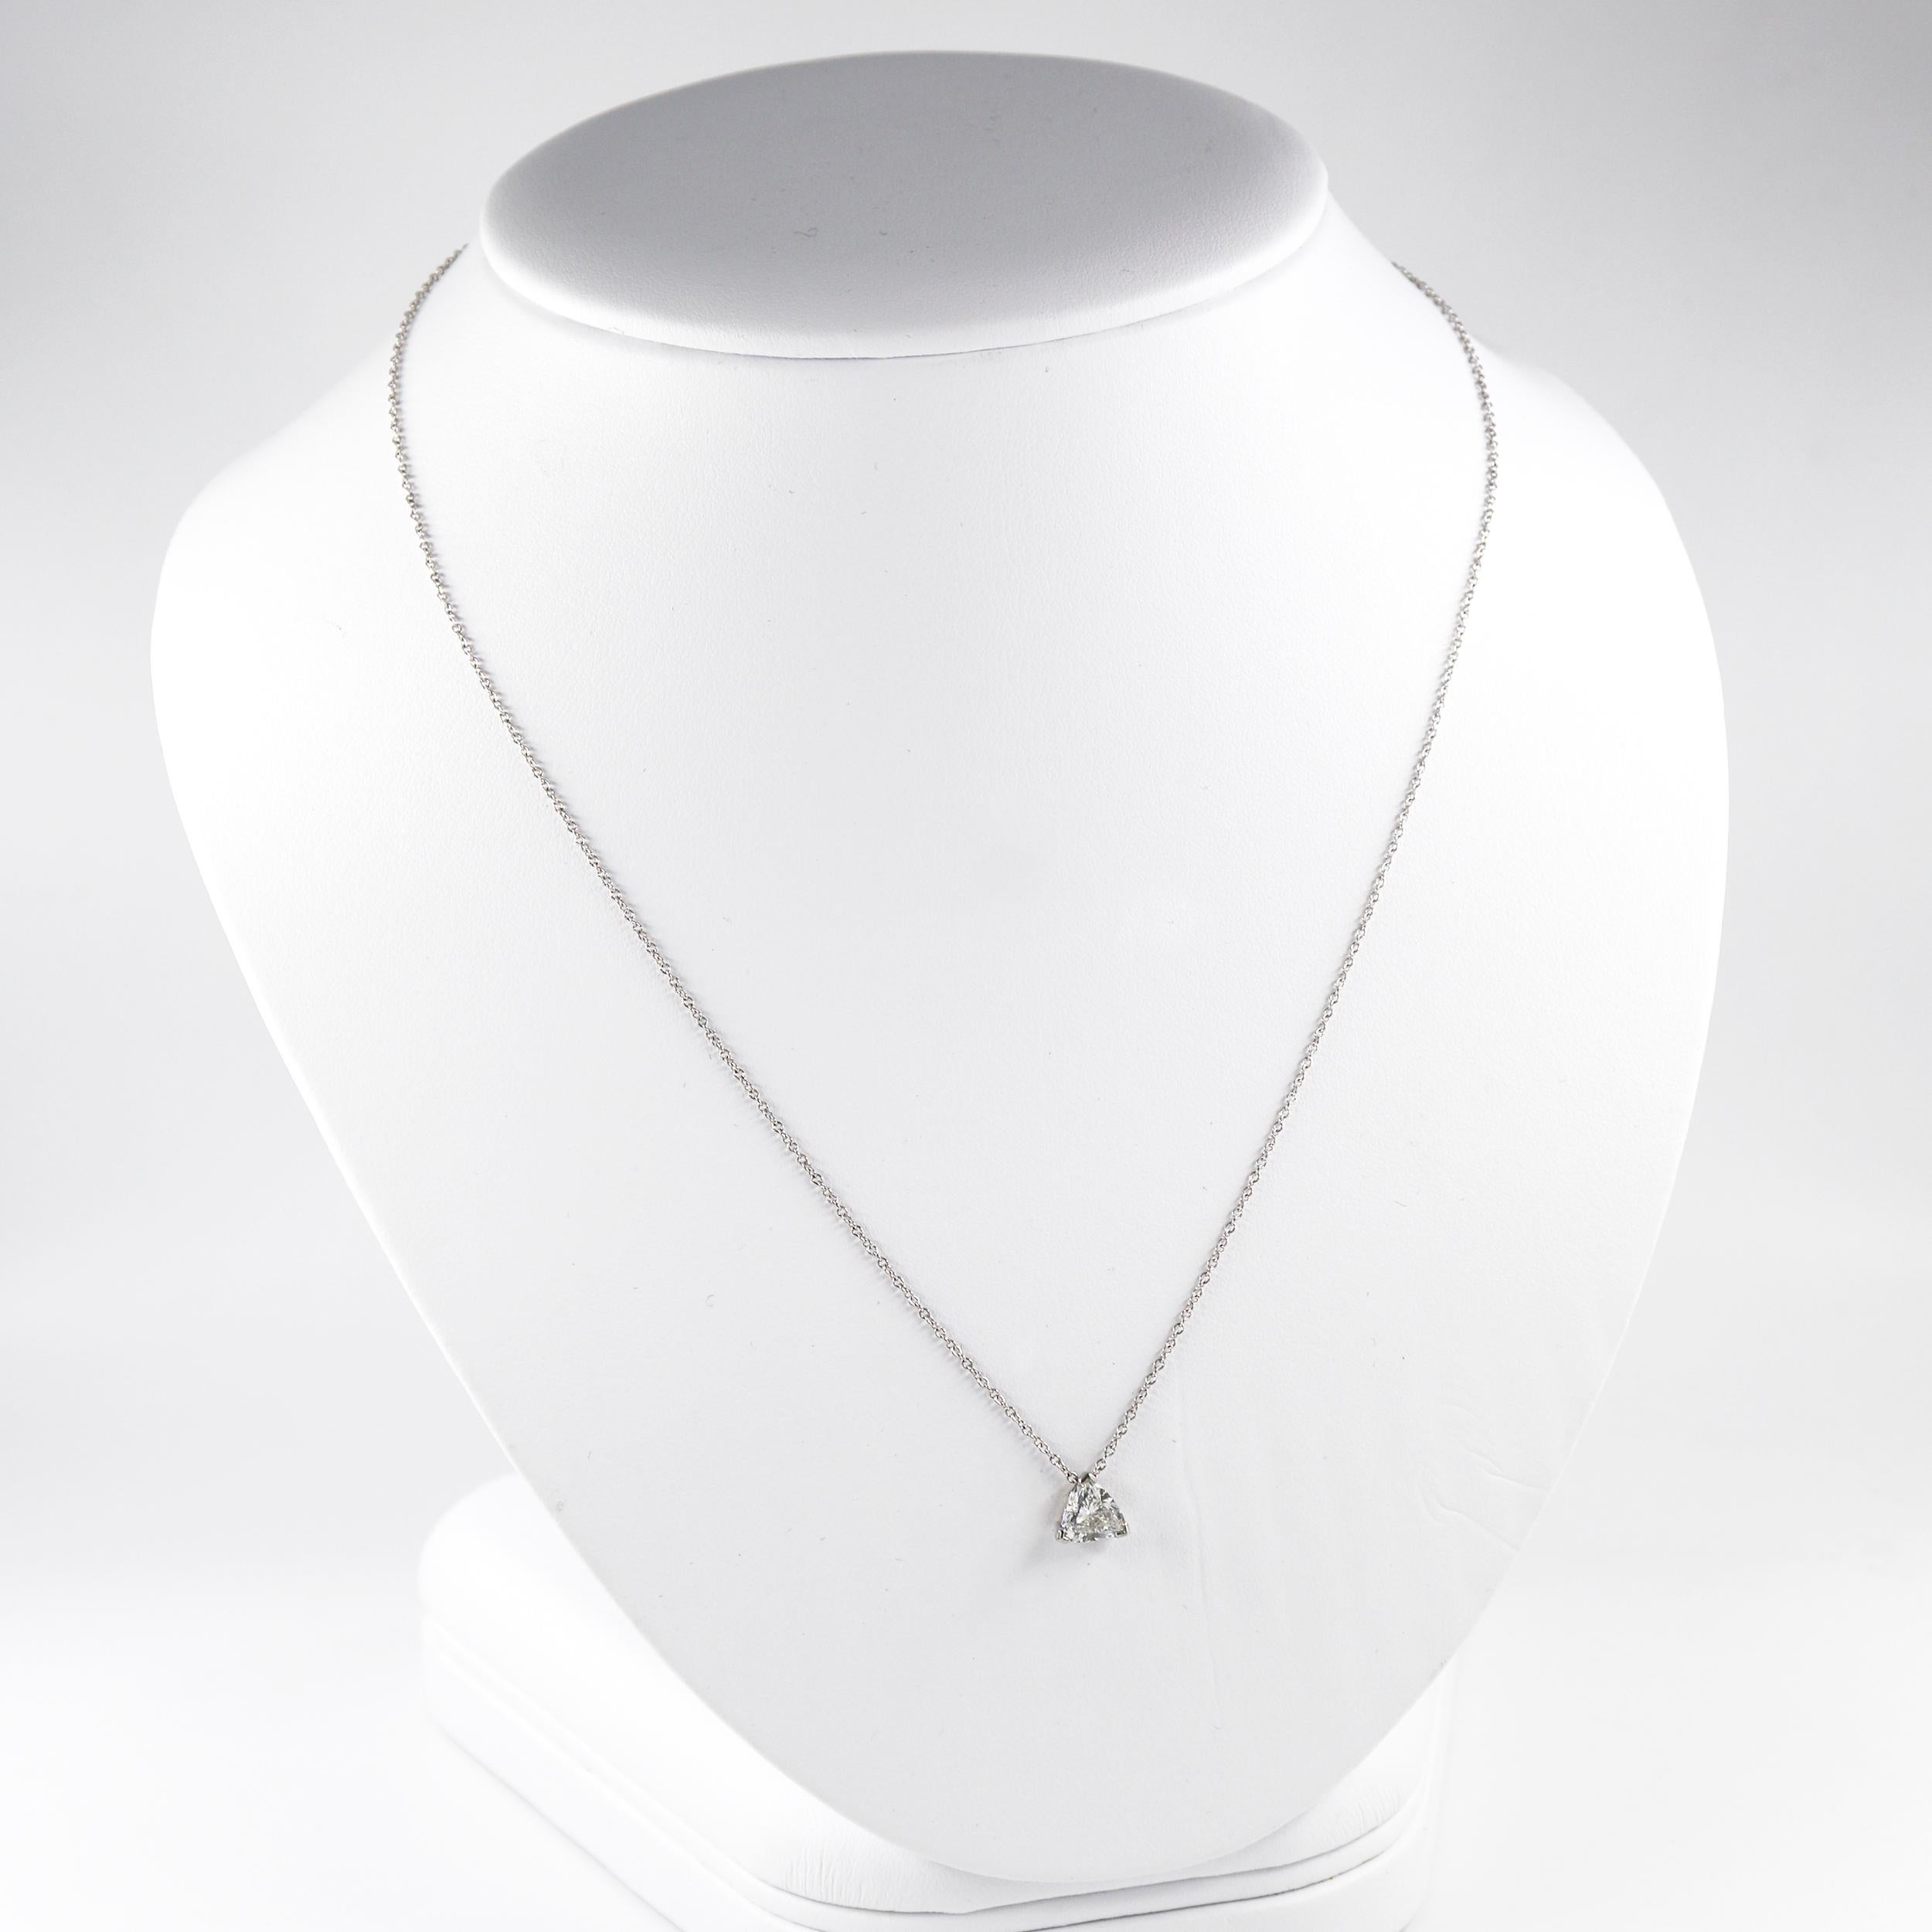 This J. Birnbach 14K White Gold Necklace features a 0.90 carat trillion cut diamond with H-I color and SI clarity. 

This necklace is stamped '14K' and is 18 in length. 

Type: Diamond Necklace
Creator: J. Birnbach
Stones: Diamond
Cut: